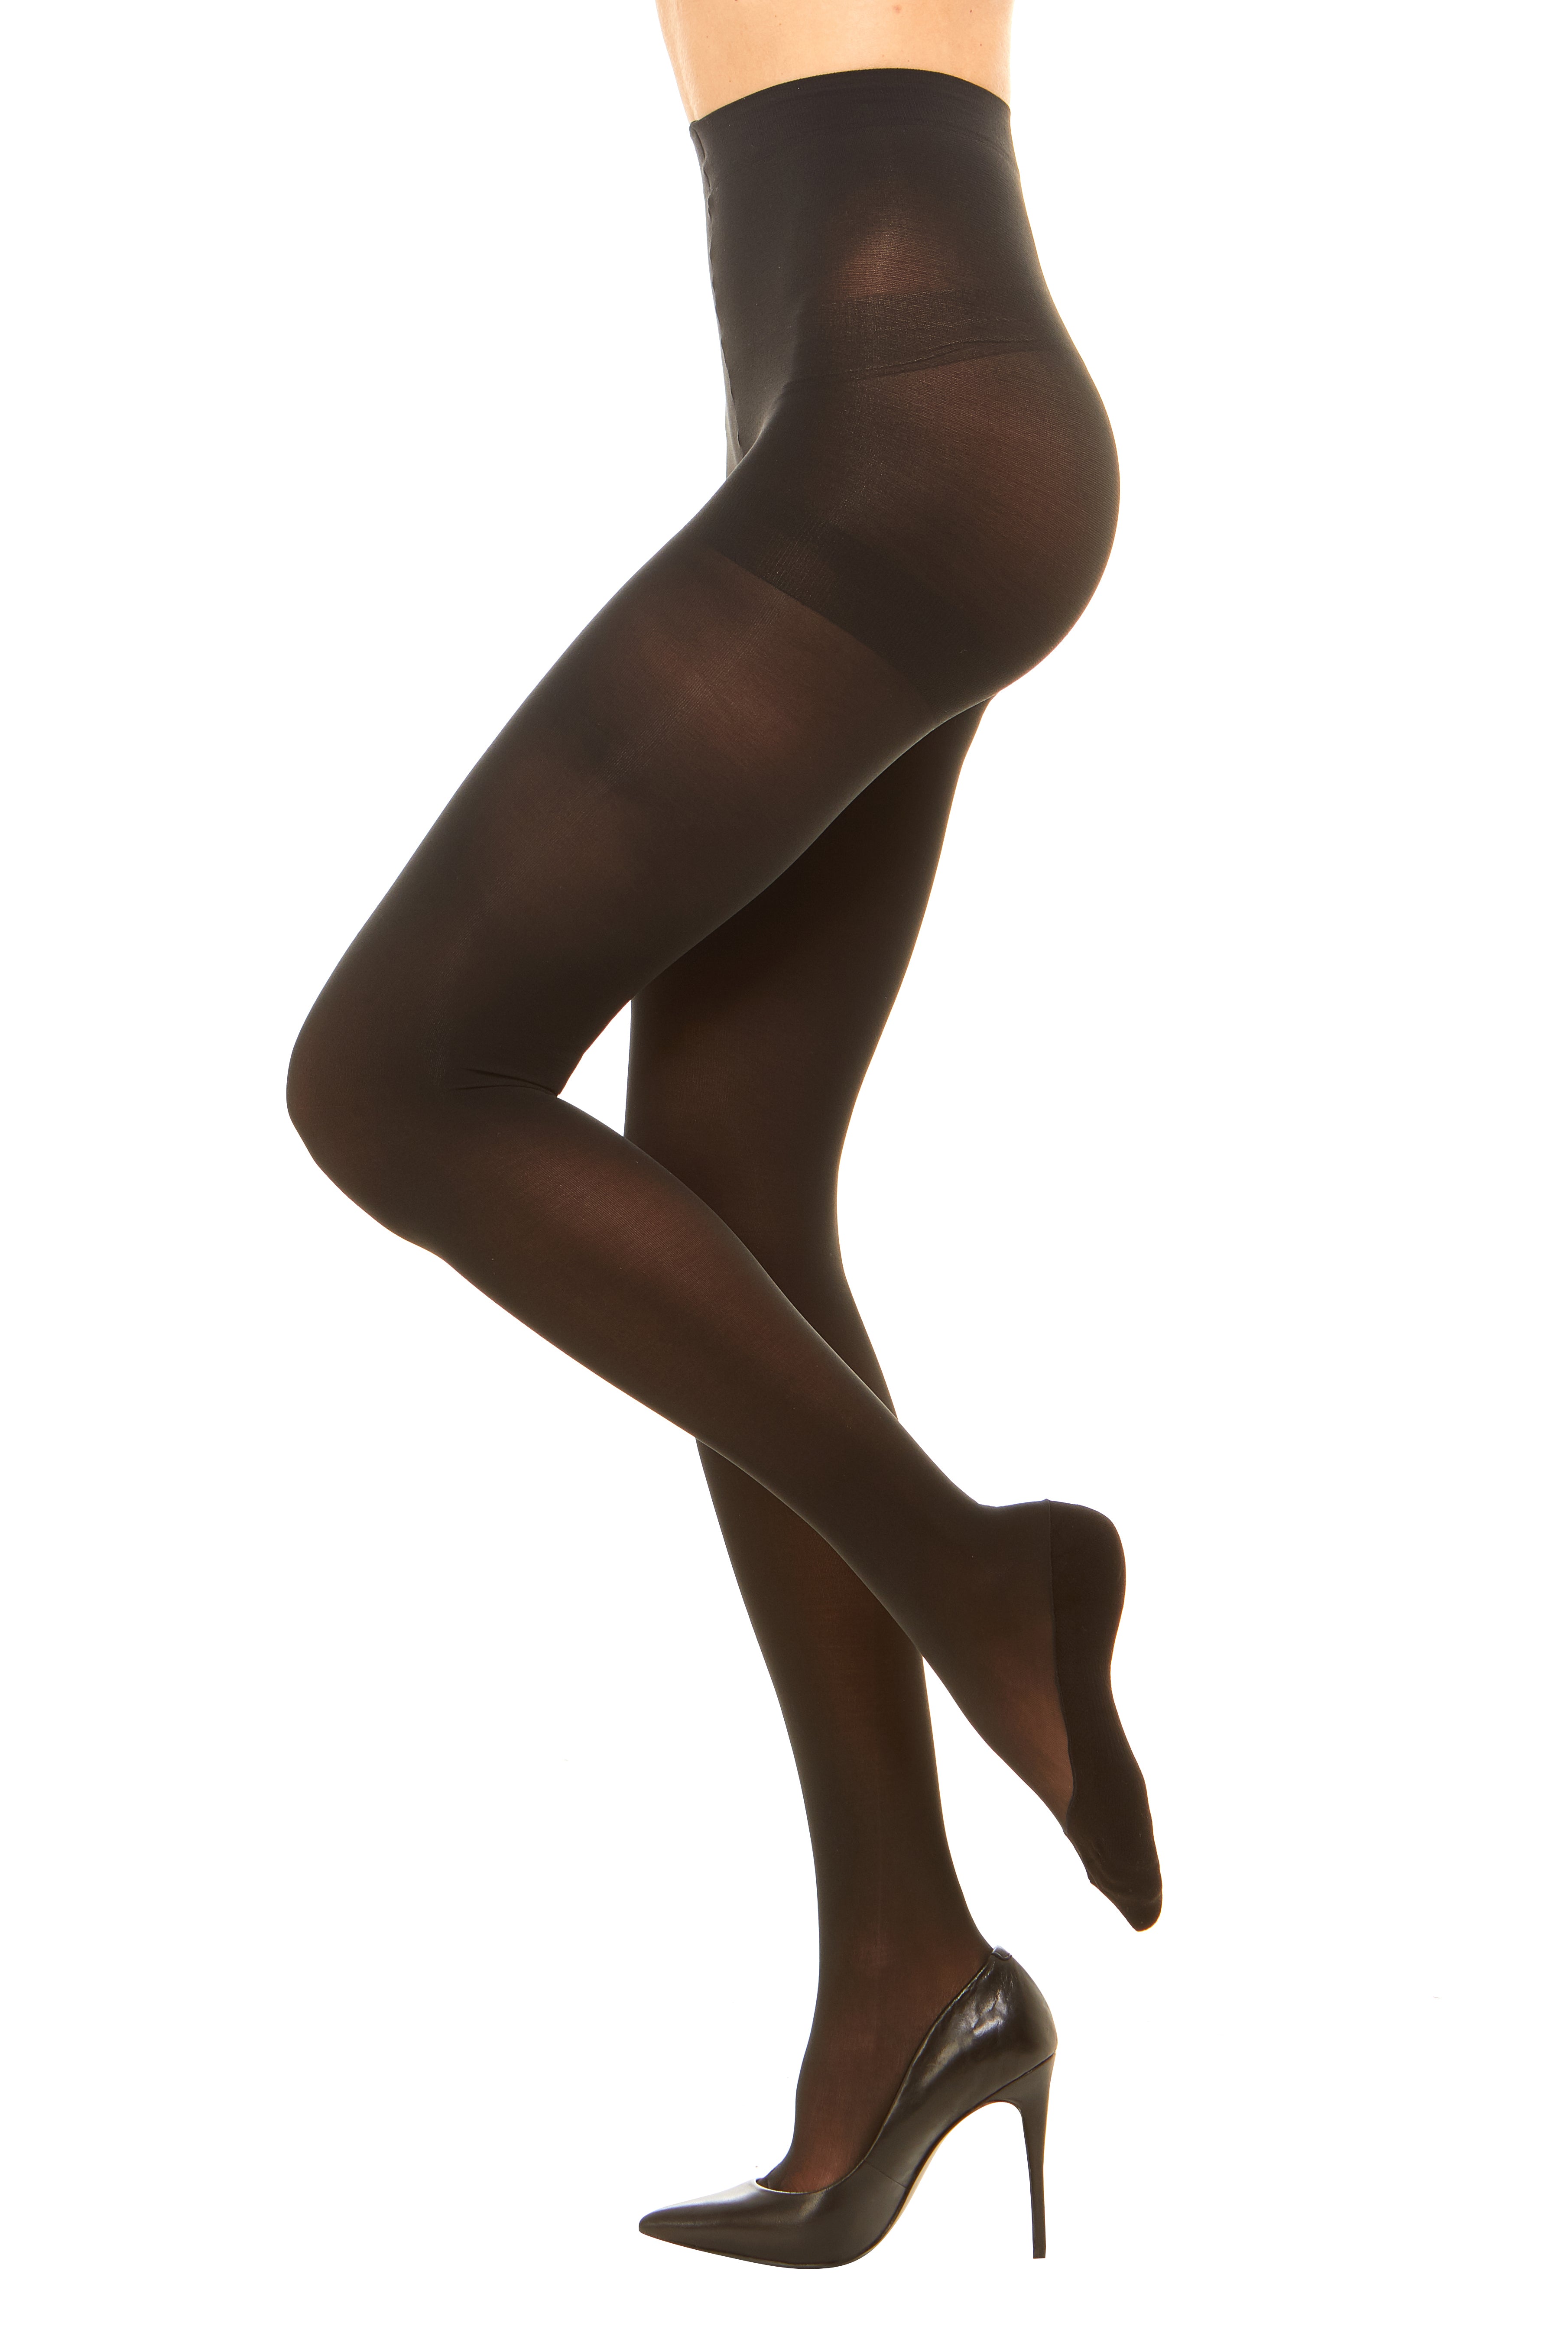 File:Sheer tights (pantyhose) with two zone control top and sandal